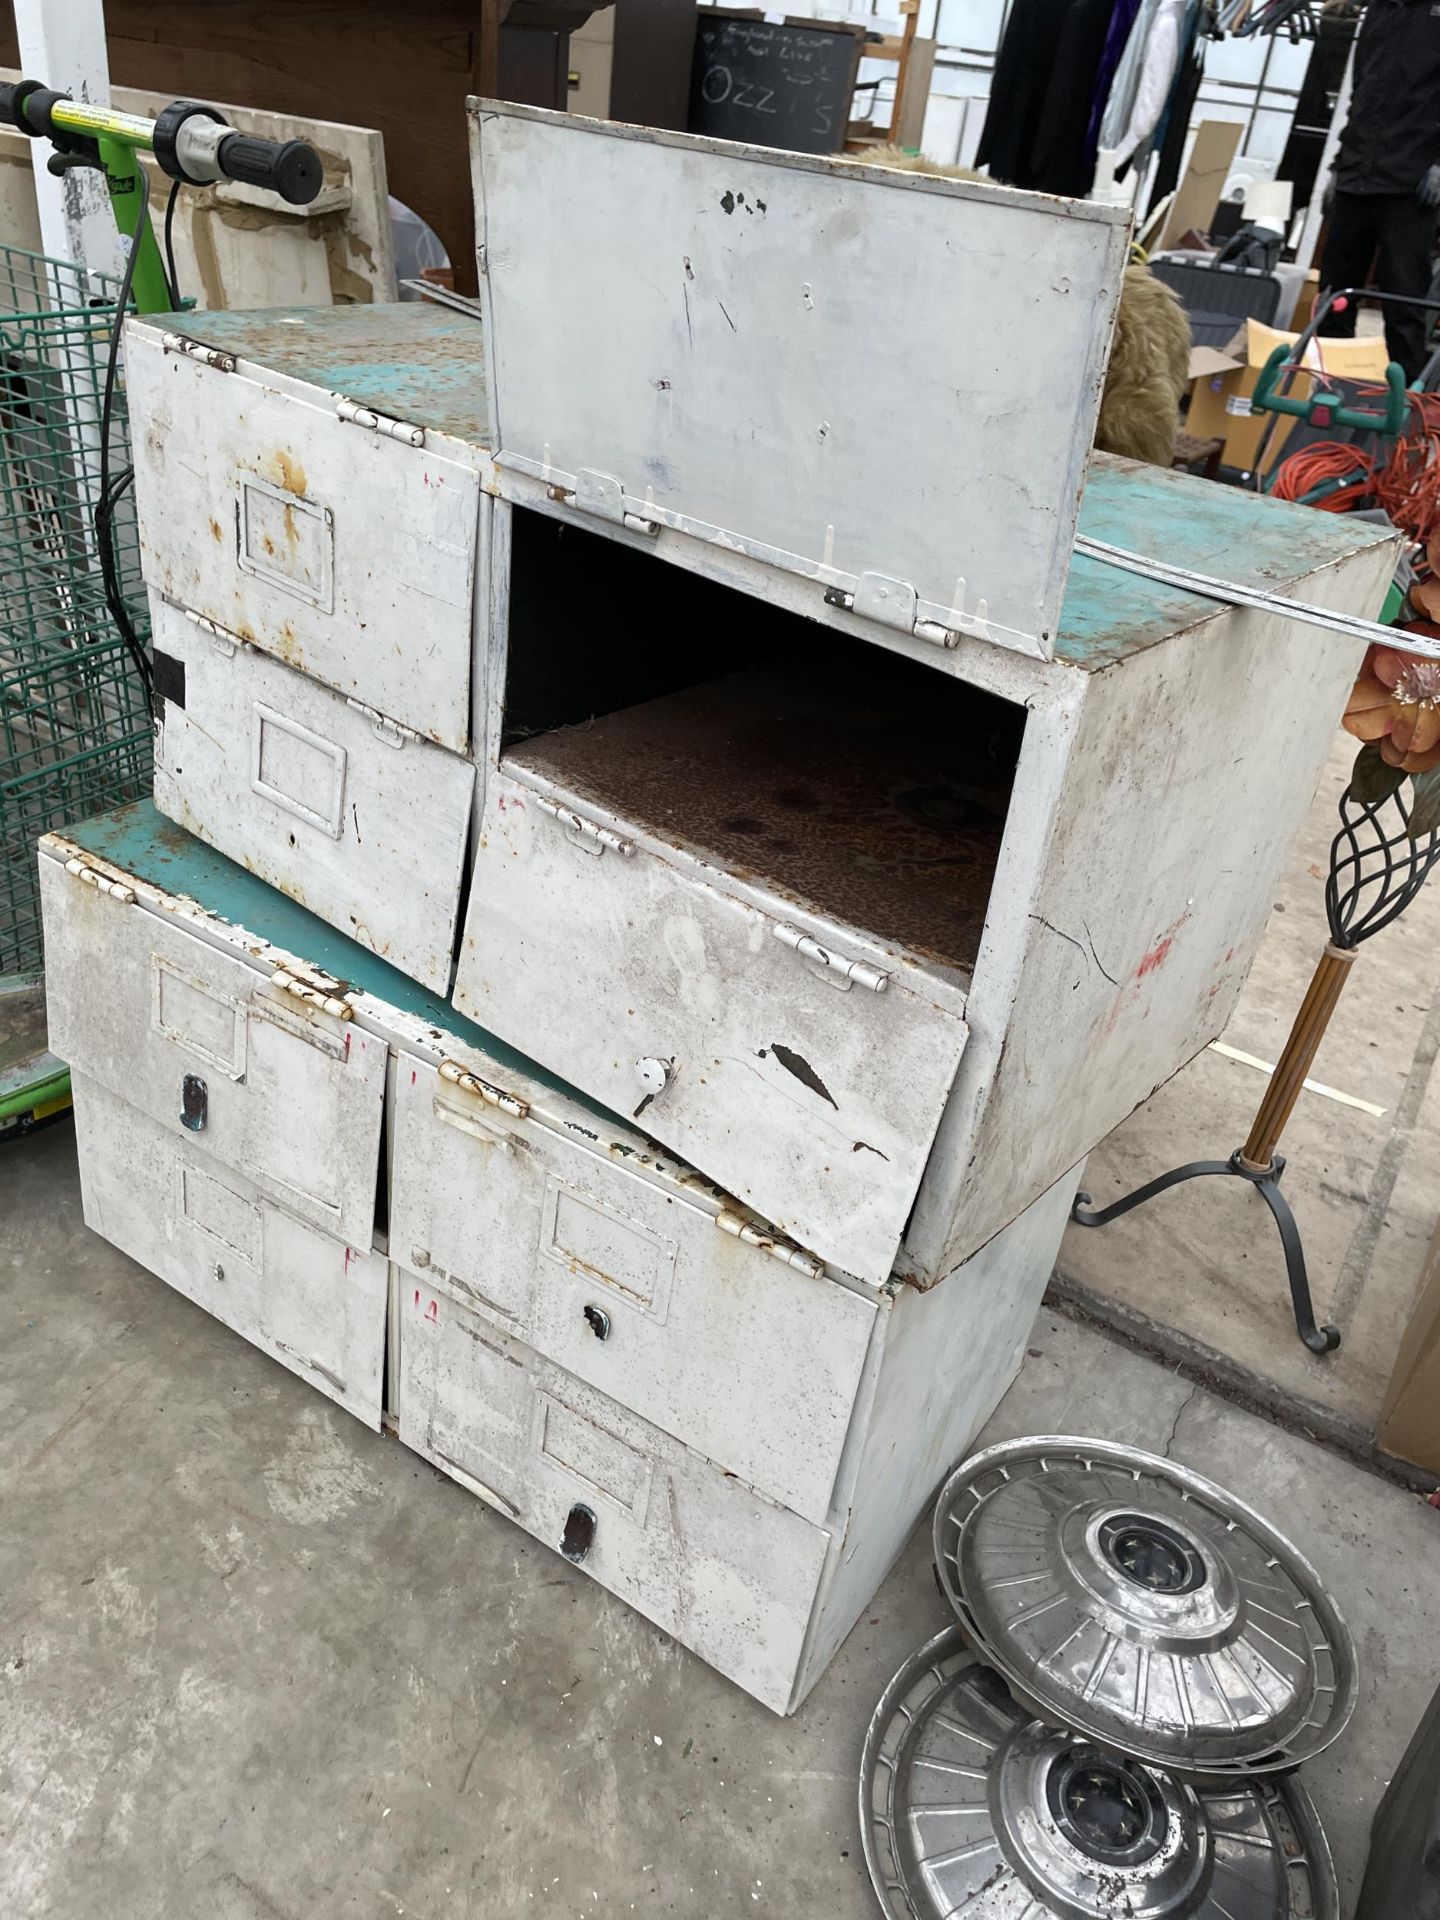 TWO VINTAGE INDUSTRIAL FOUR SECTION STORAGE UNITS WITH LIFT UP DOORS - Image 2 of 2